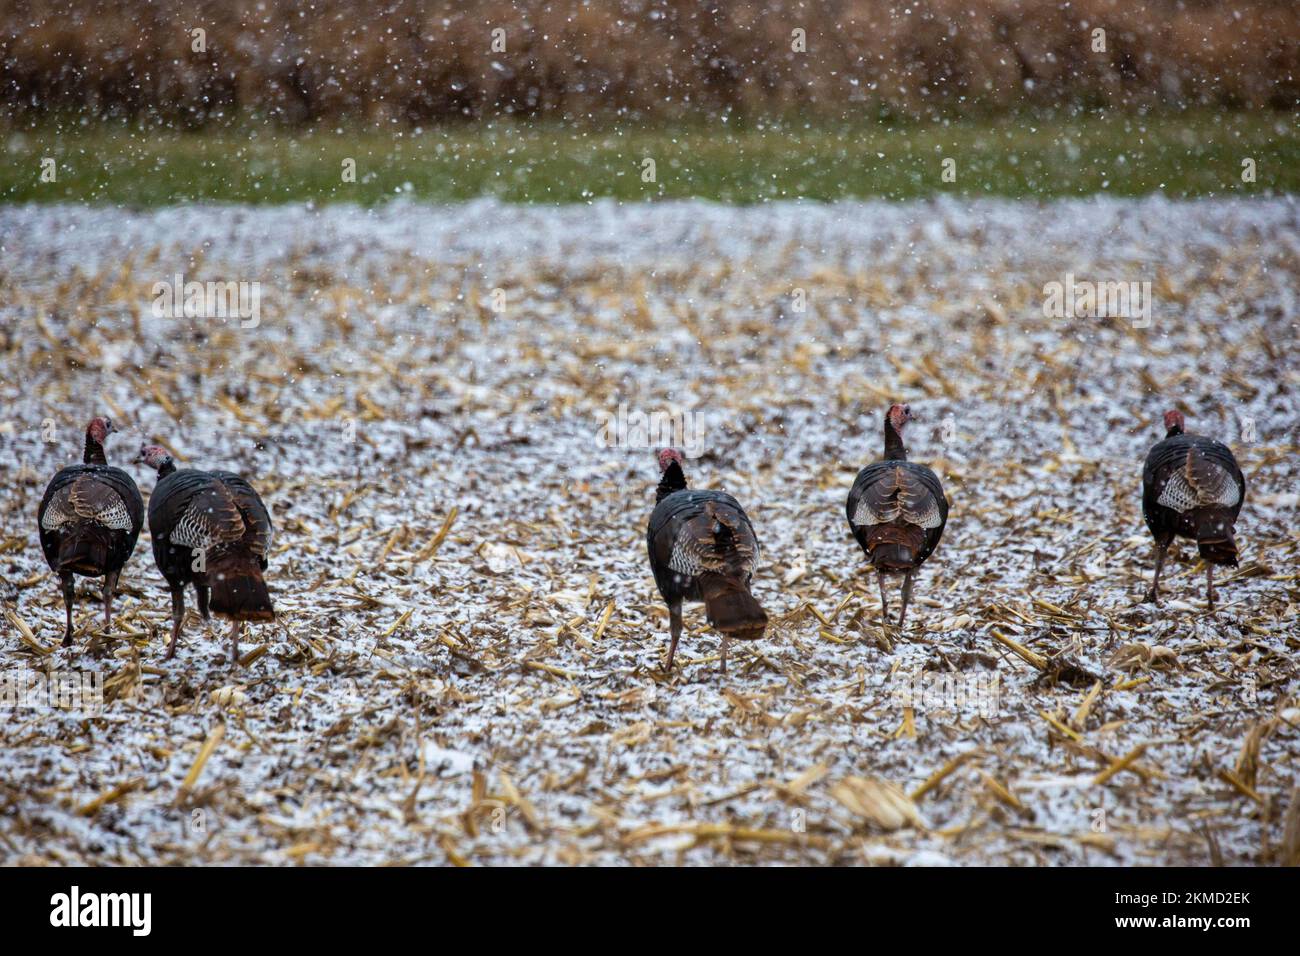 Flock of (Meleagris gallopavo) wild turkeys eating in a Wisconsin snow covered field, horizontal Stock Photo